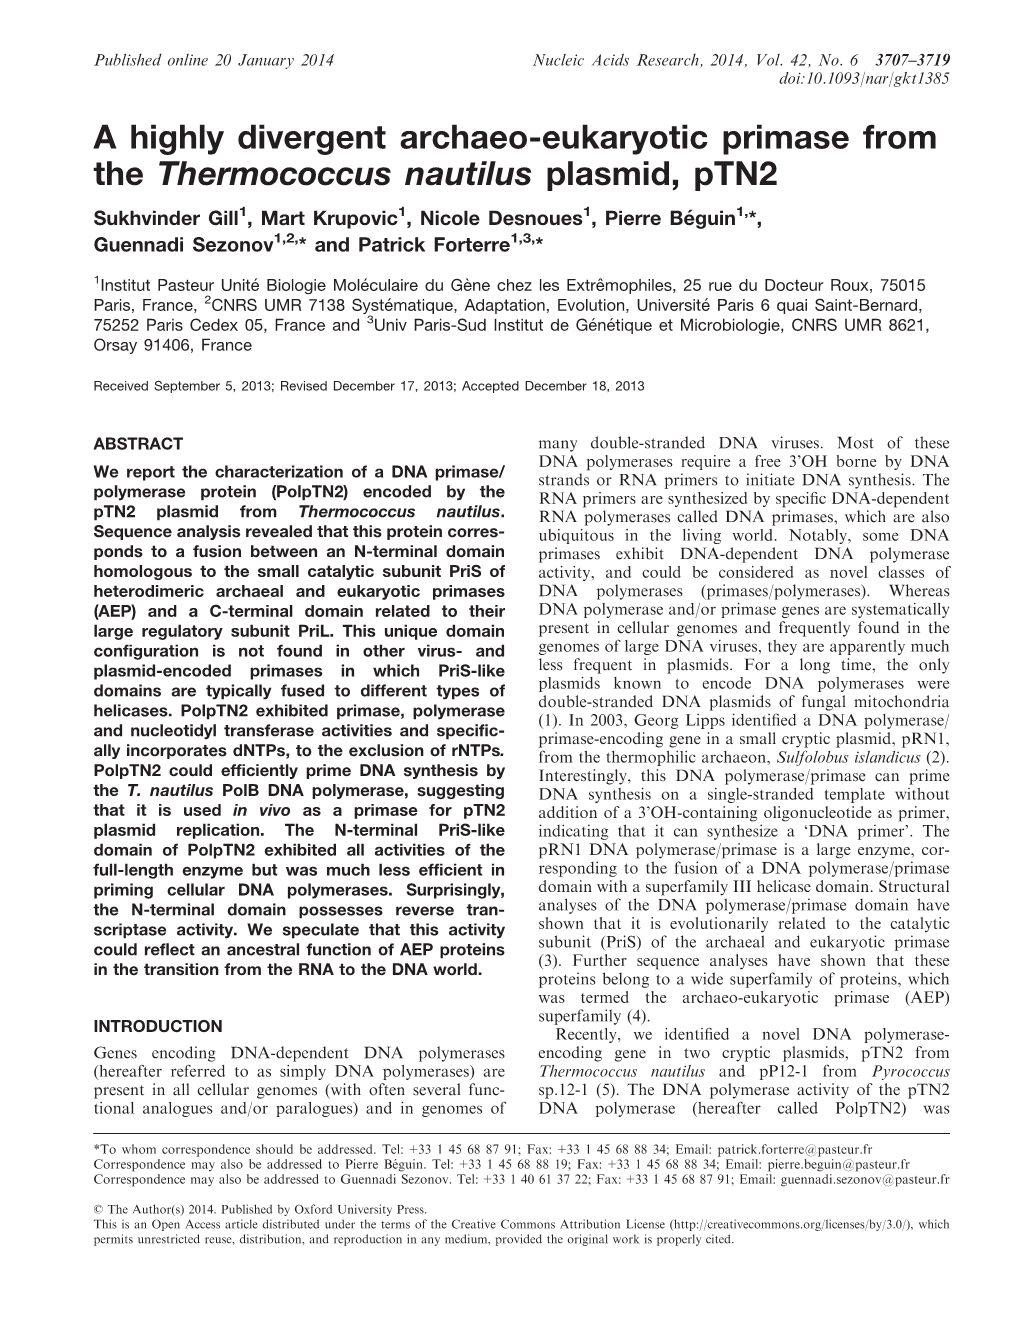 A Highly Divergent Archaeo-Eukaryotic Primase from the Thermococcus